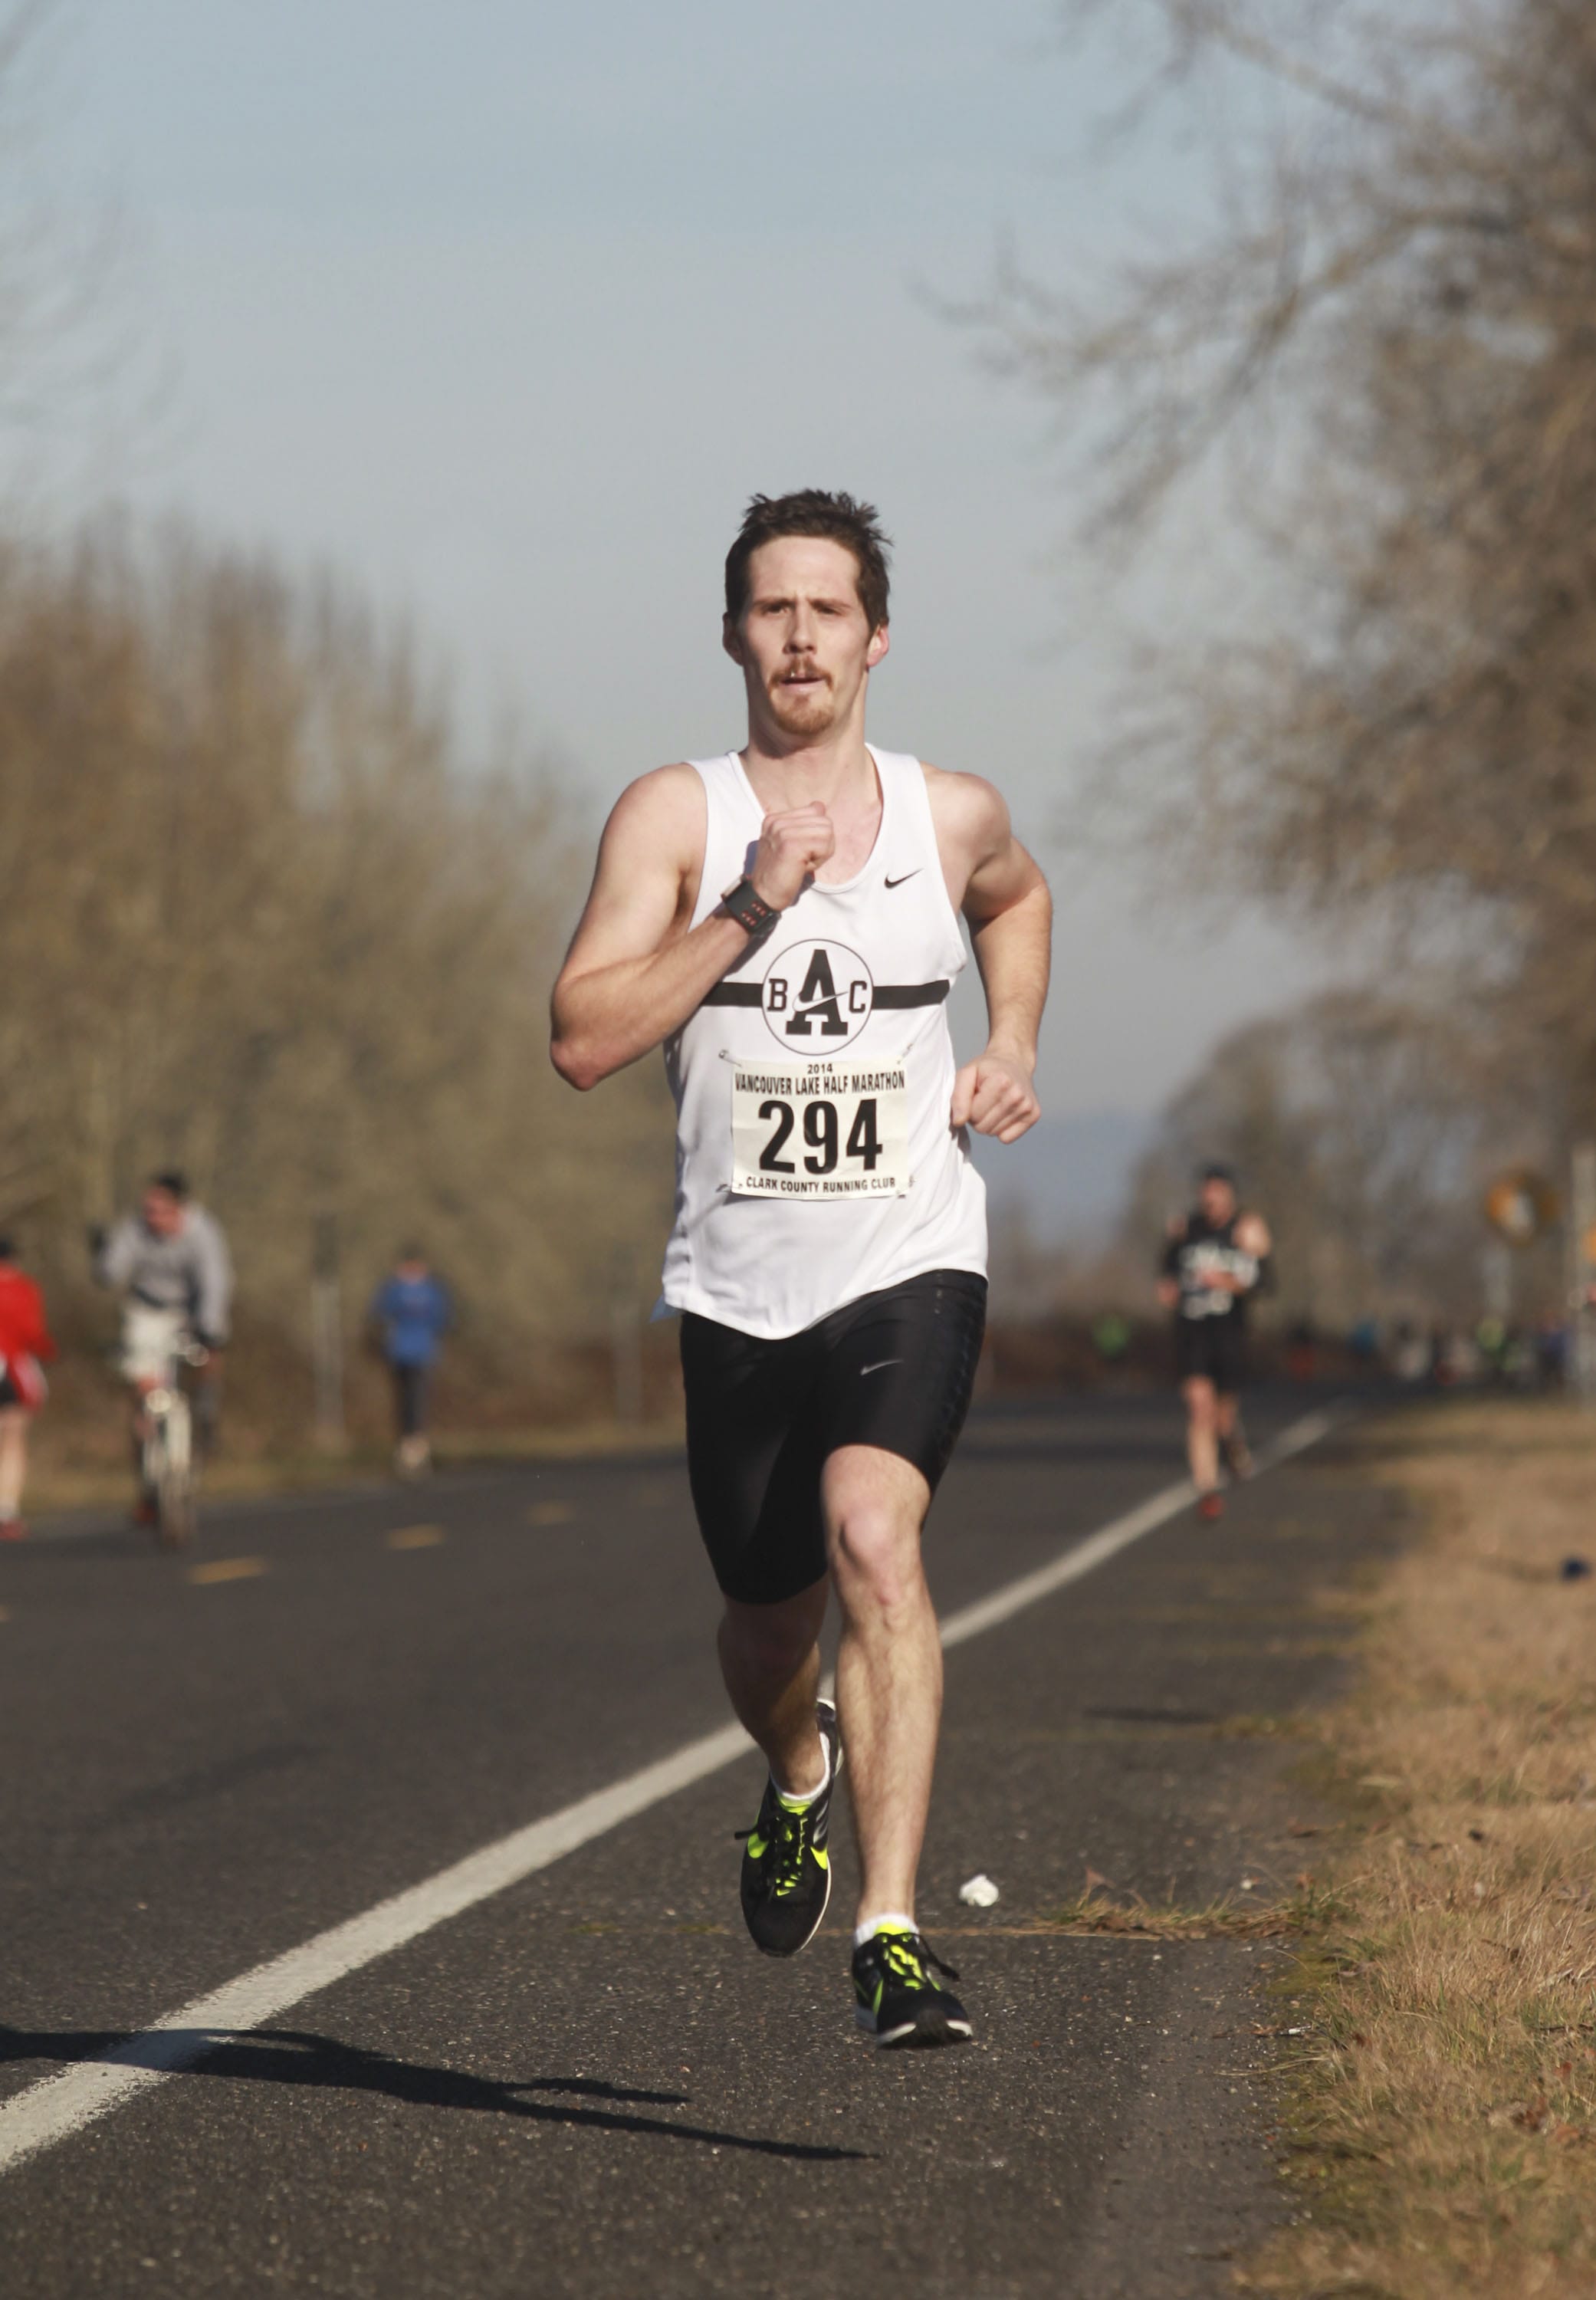 Jesse McChesney, who took first place, runs in annual Vancouver Lake Half Marathon on Sunday.